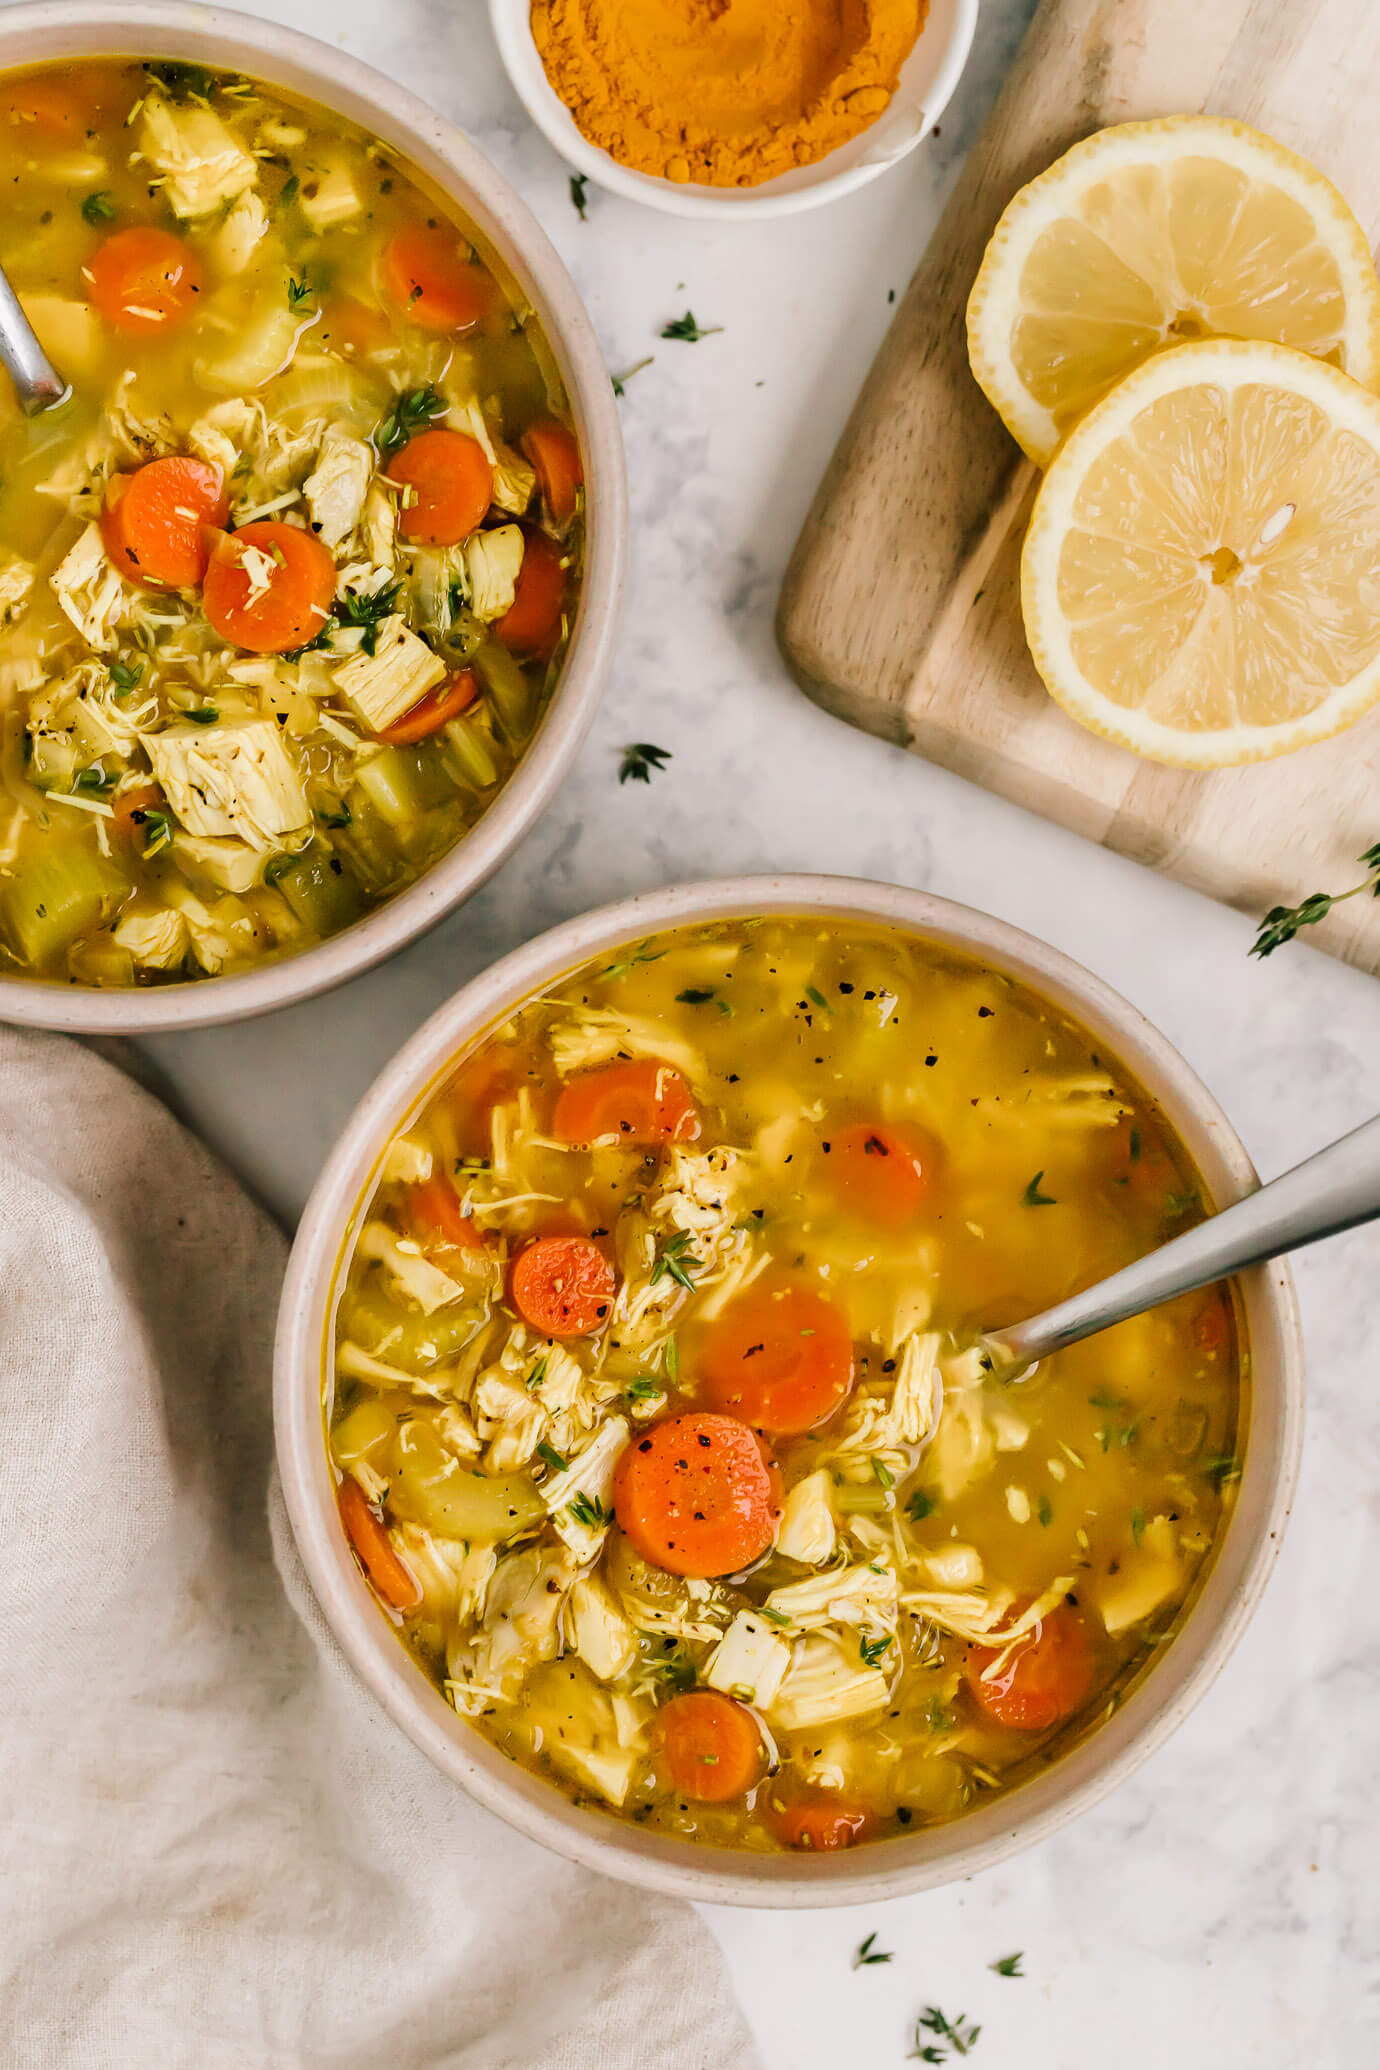 A nourishing chicken soup with no noodles that comes together quickly using rotisserie chicken. It's a veggie-loaded chicken no noodle soup with herbs and a touch of turmeric and lemon. Grain-free, Gluten-free and paleo friendly.